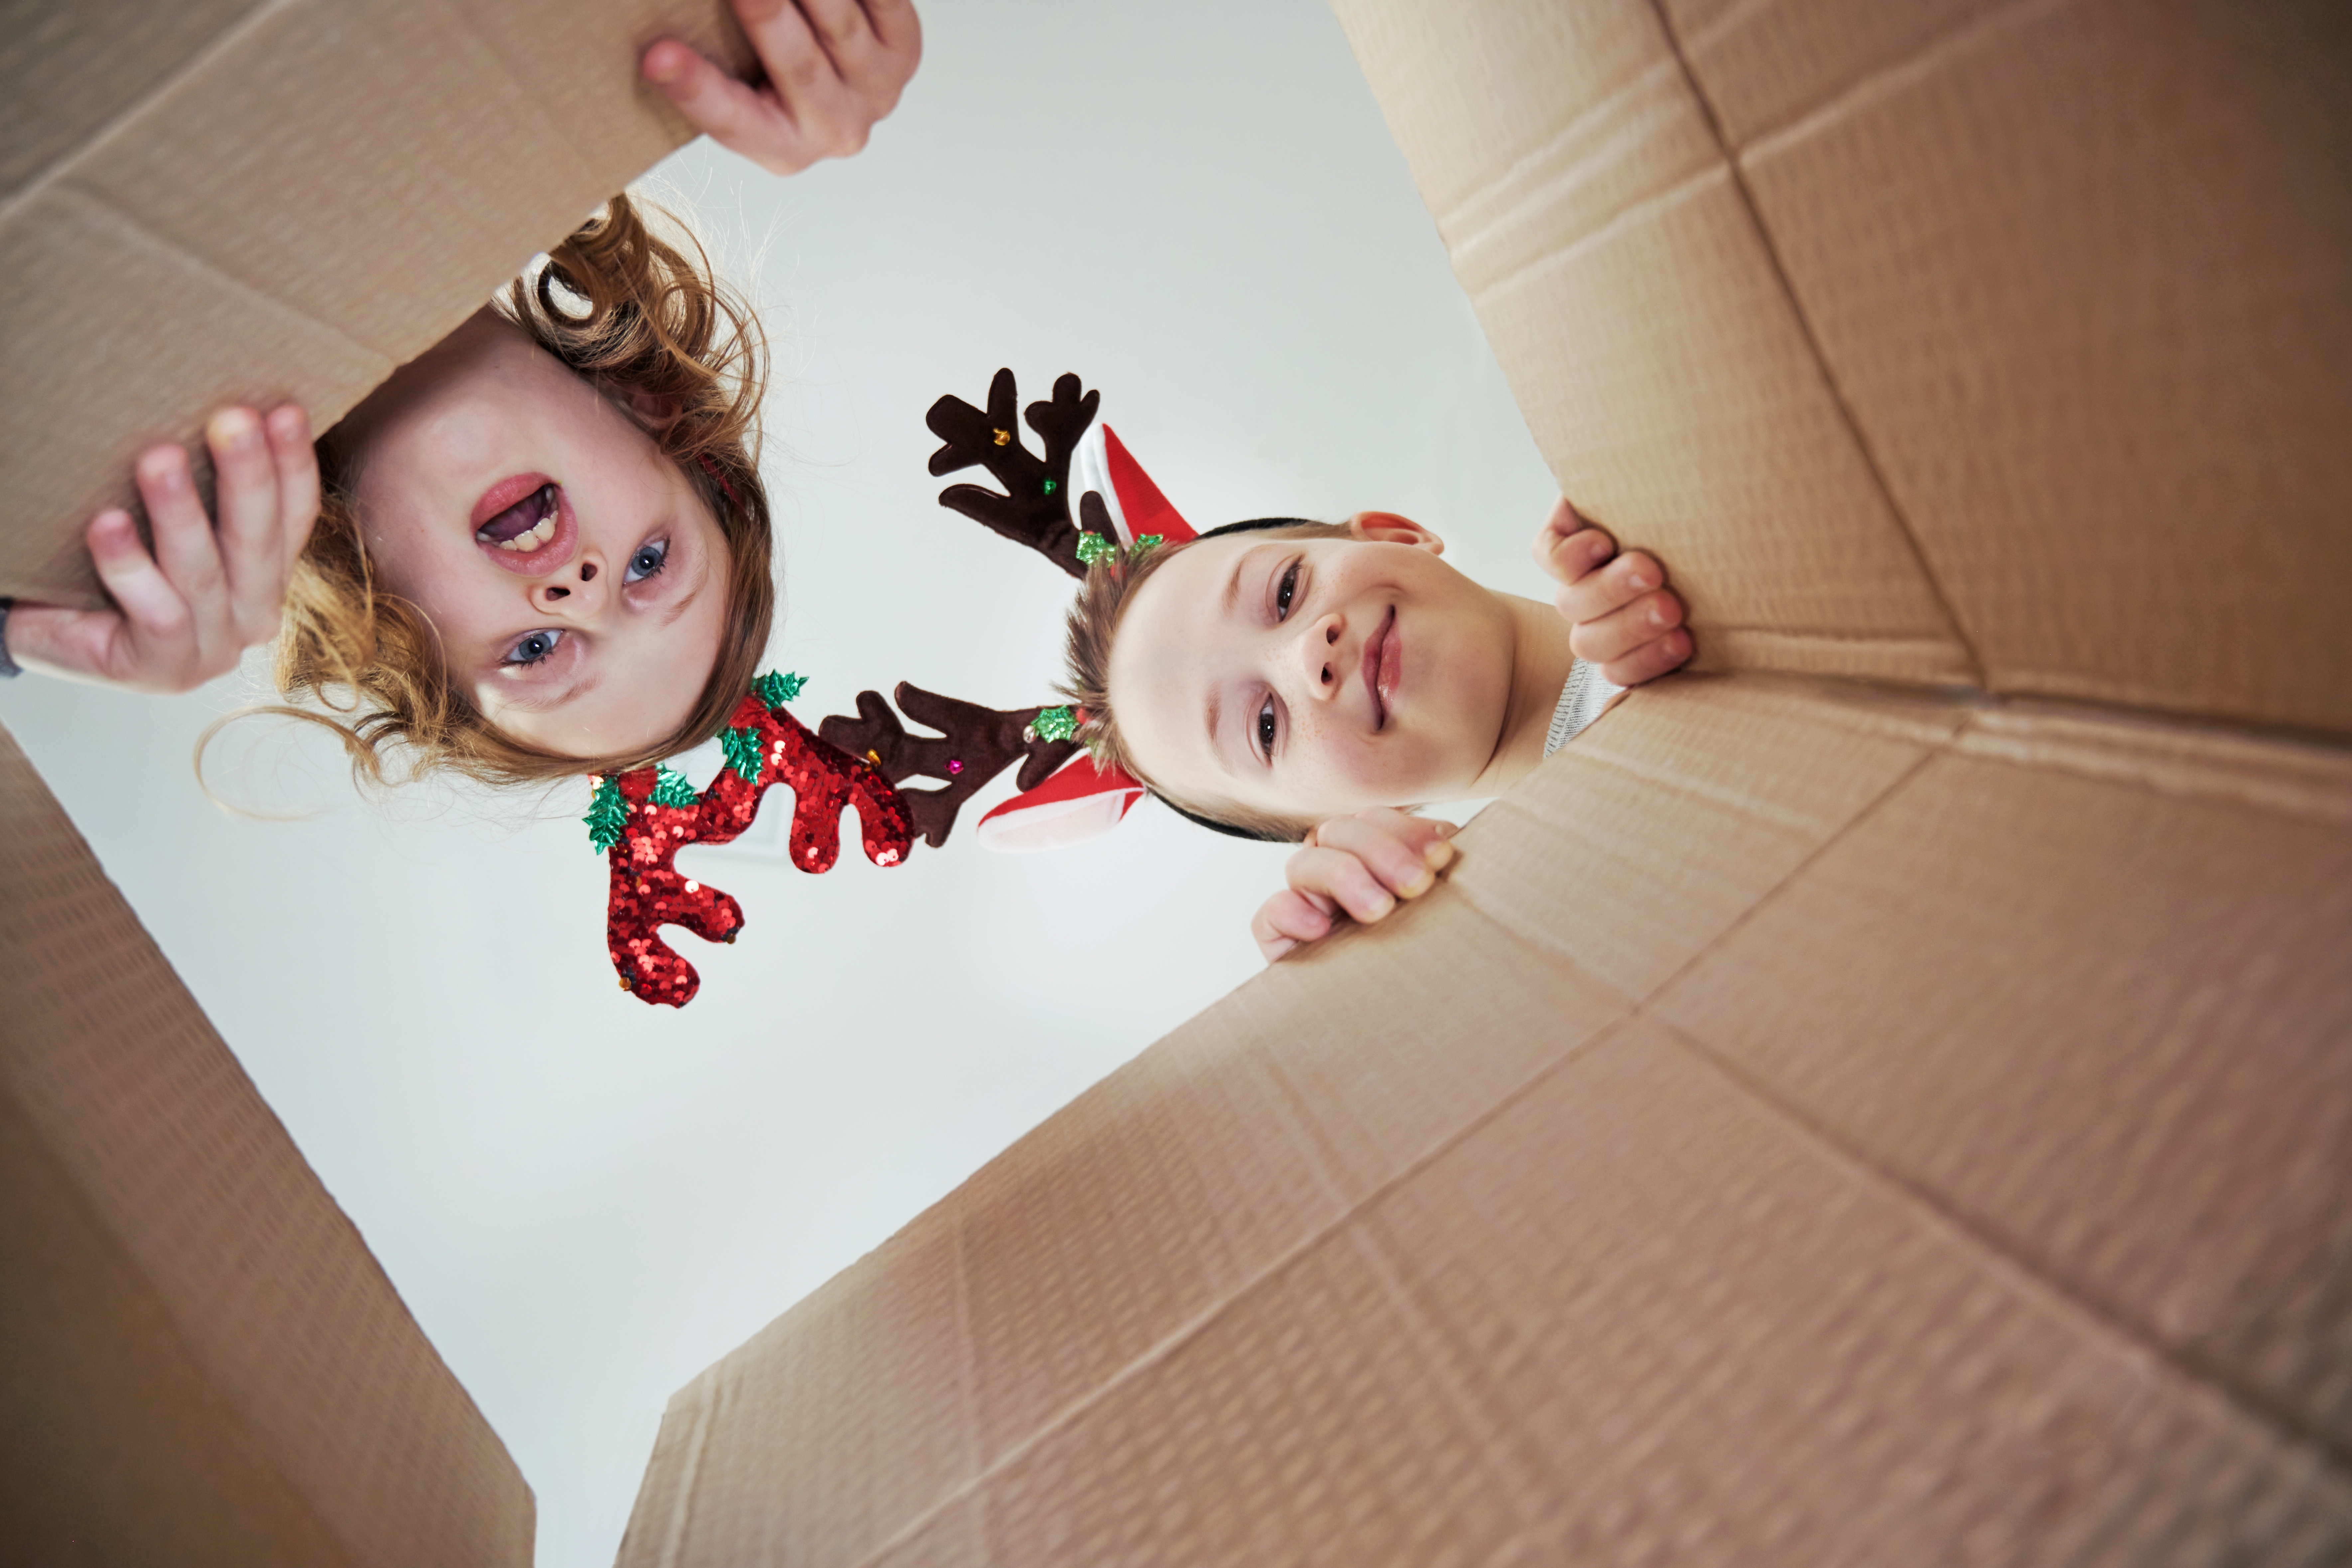 A boy and a girl looking inside a cardboard box | Source: Shutterstock